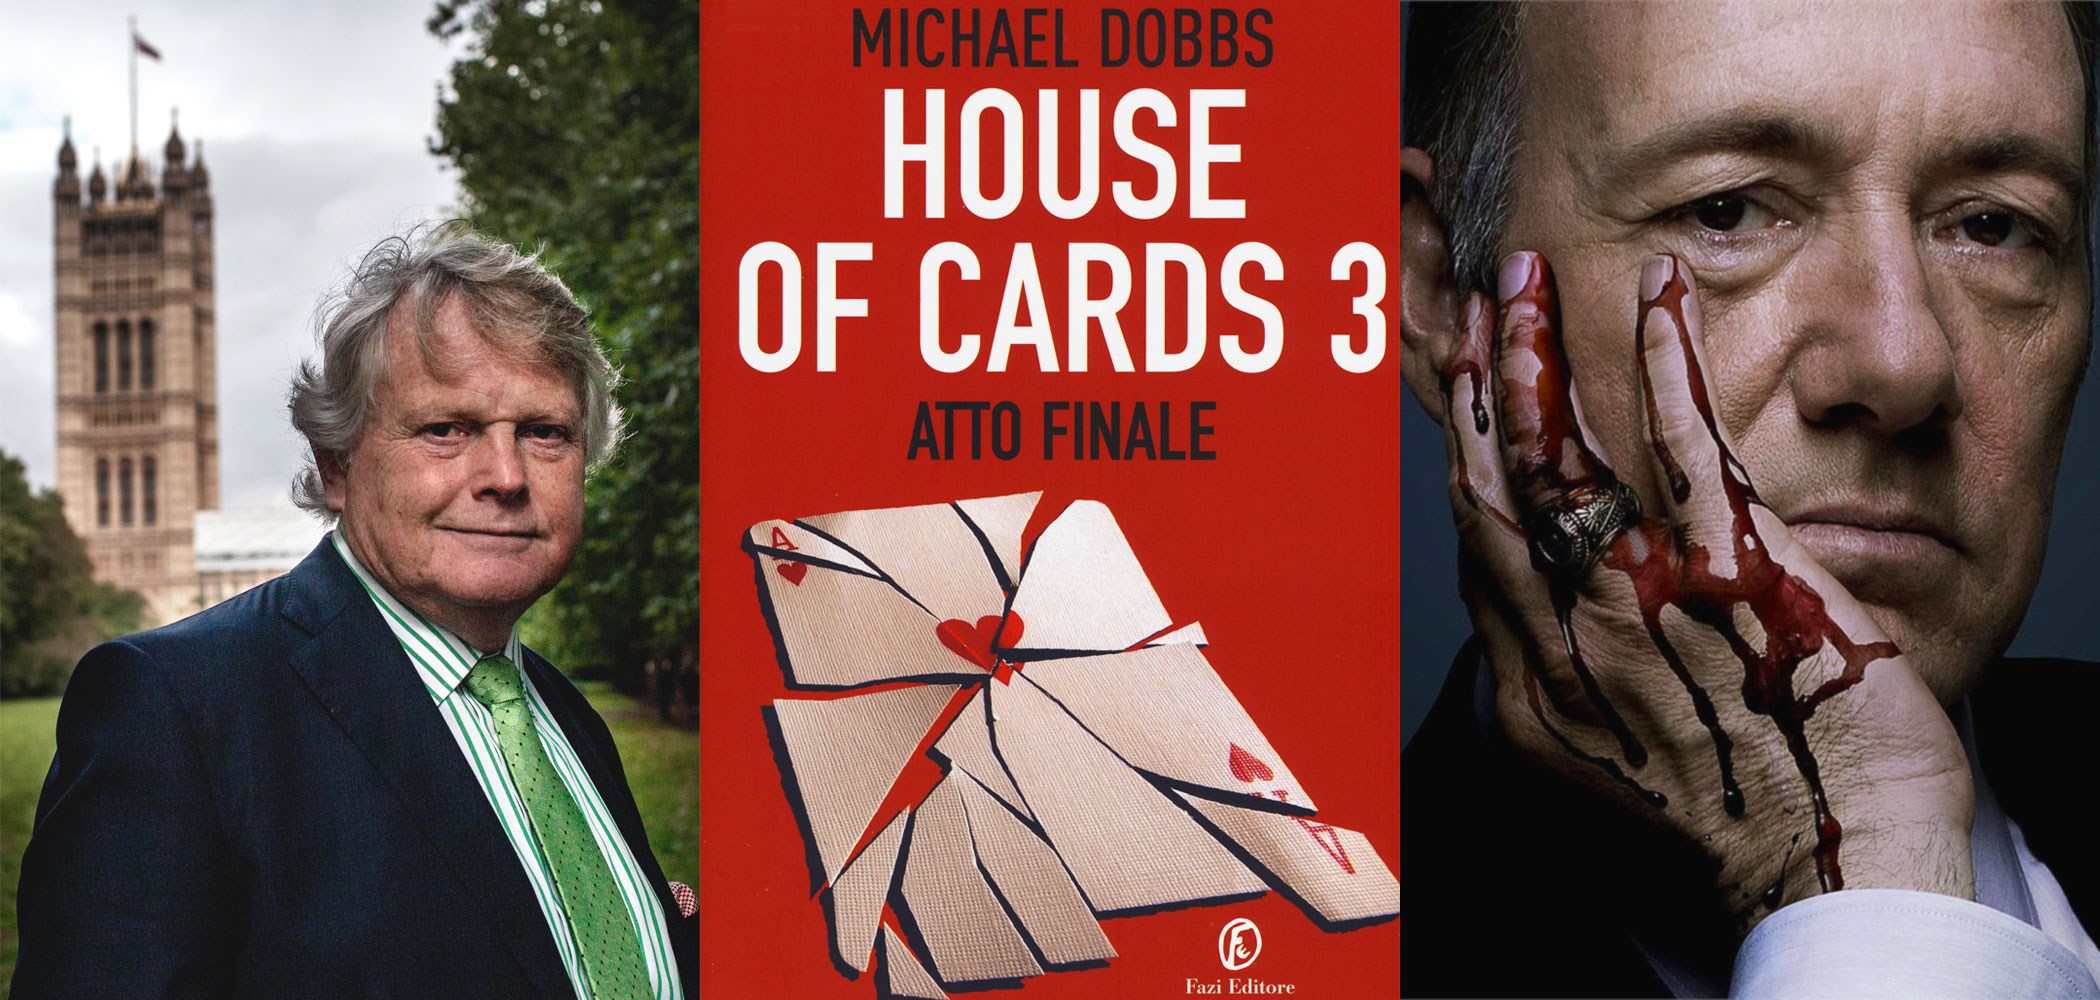 House of cards 3 - libro - Michael Dobbs - Kevin Spacey